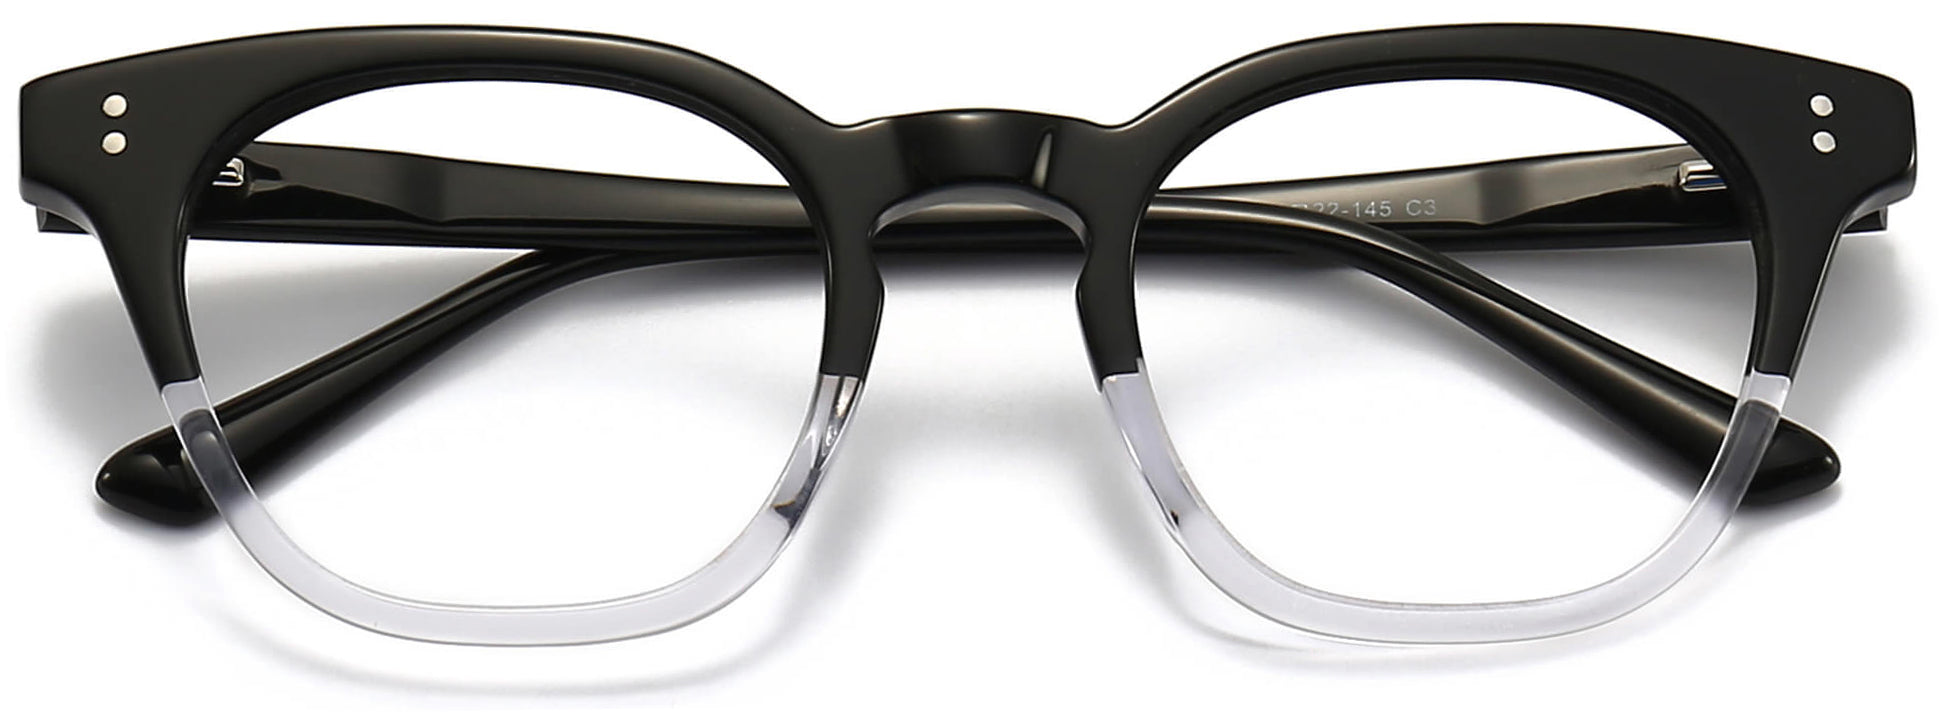 Clare Cateye Black Eyeglasses from ANRRI, closed view